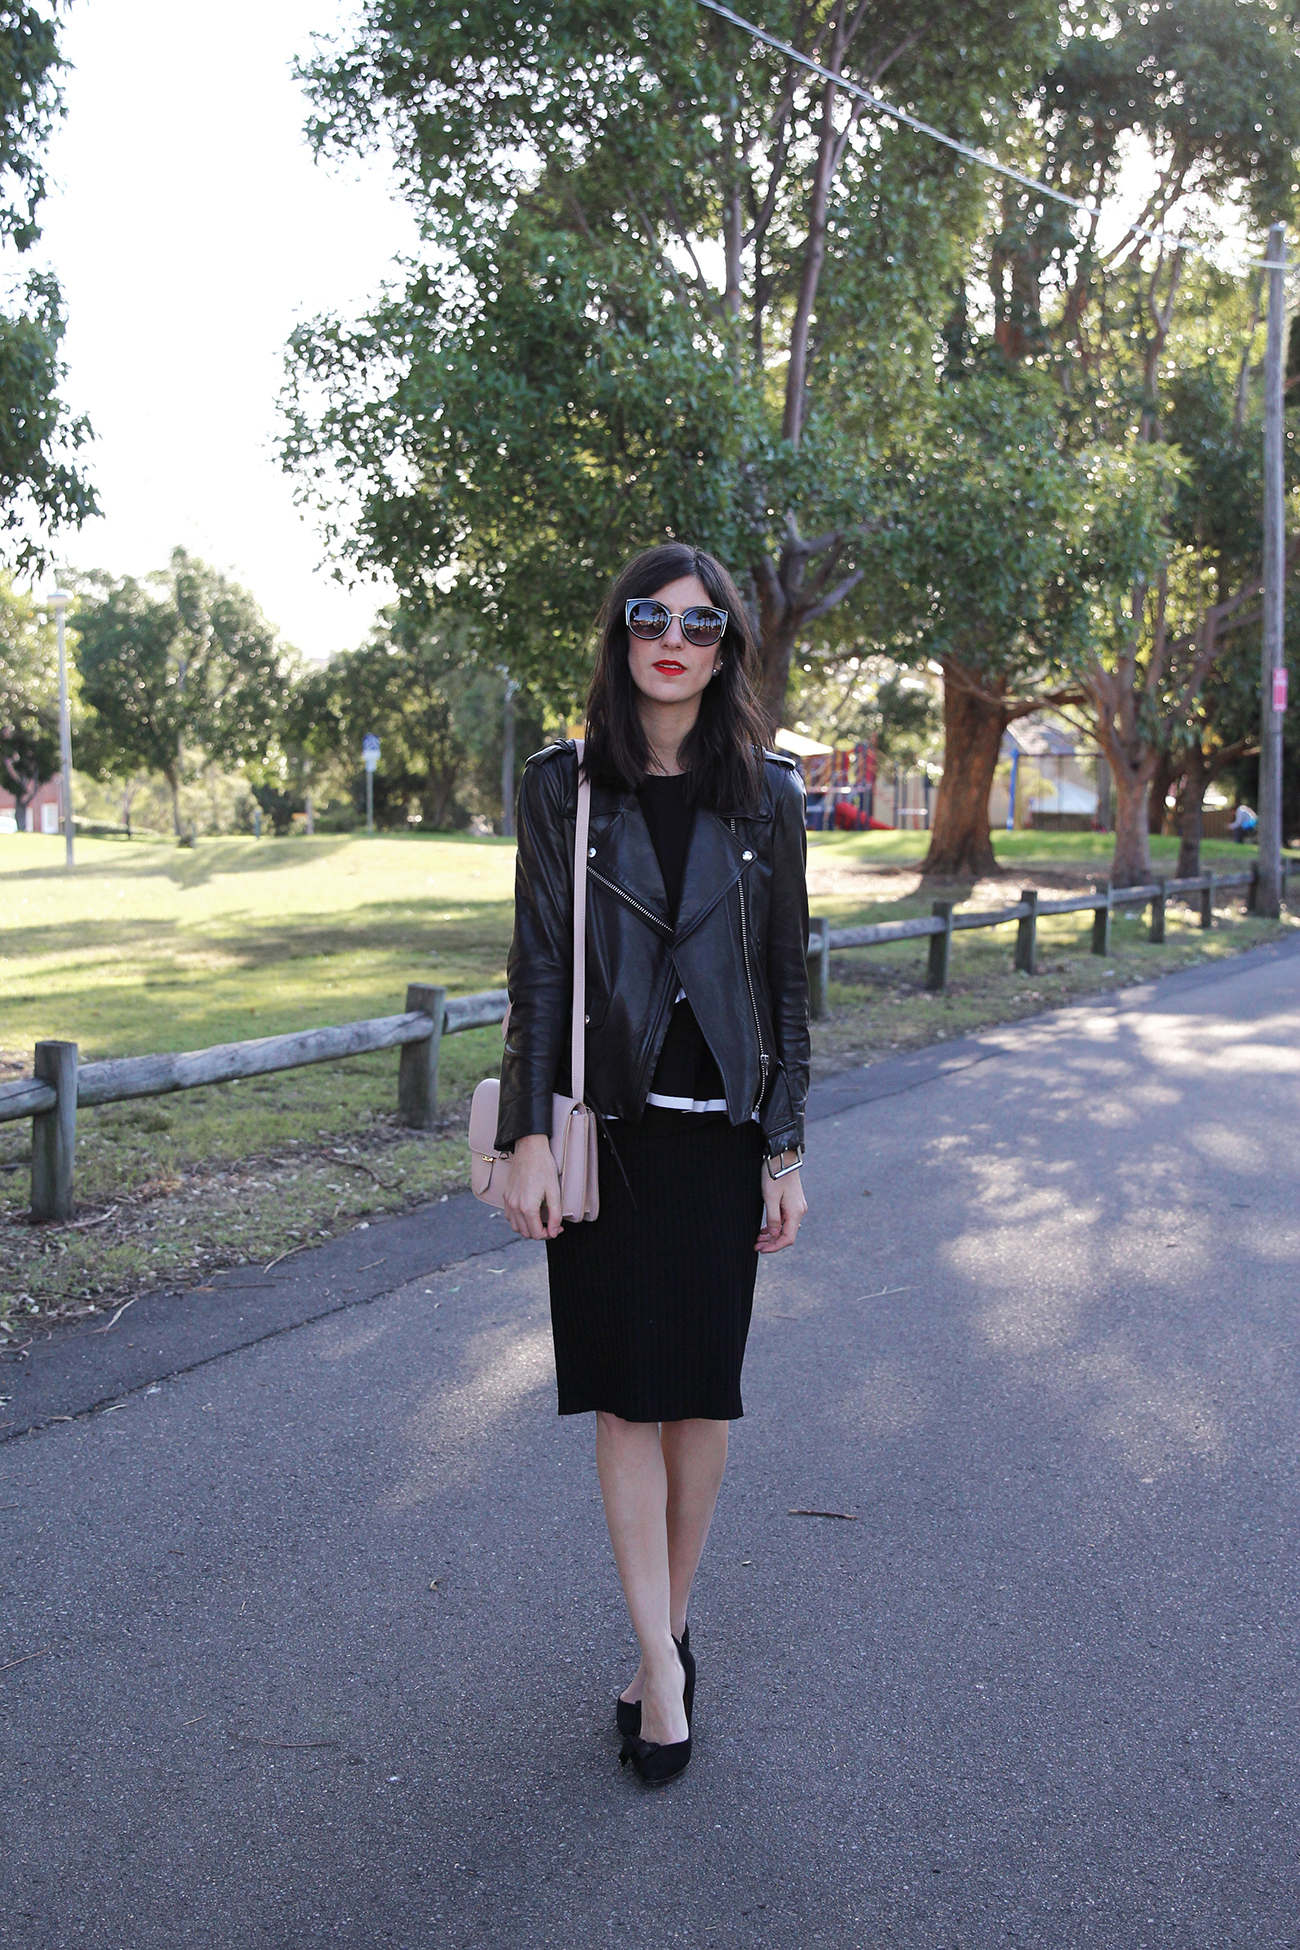 How to wear all black without looking boring